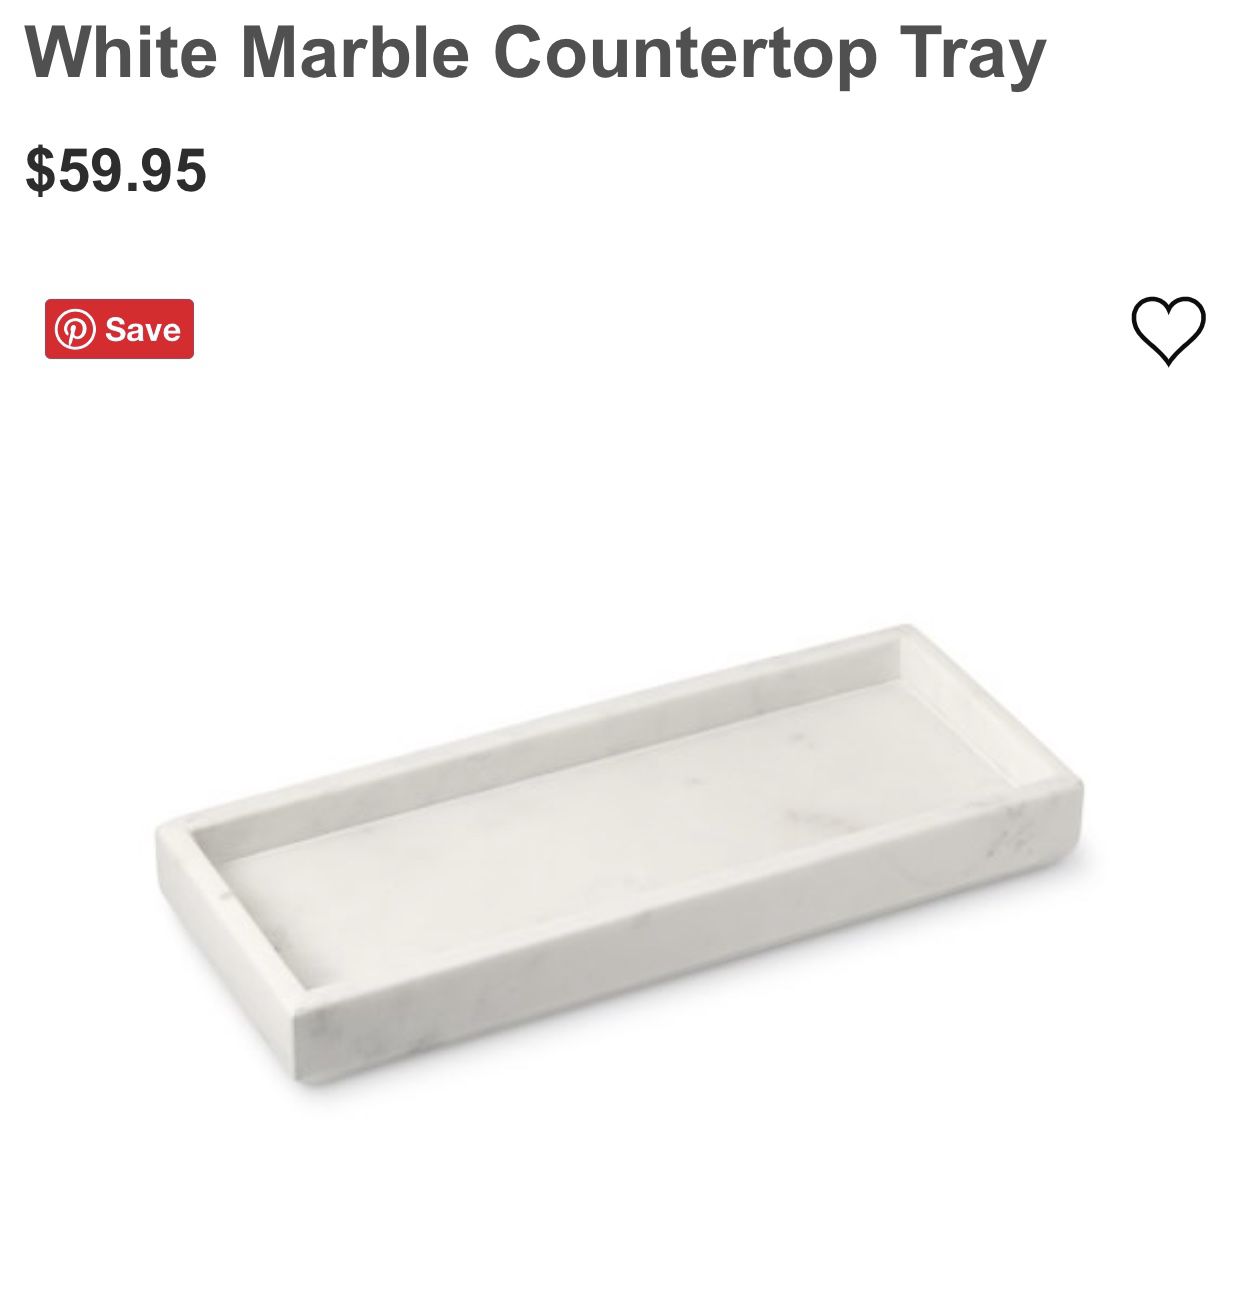 NEW, IN BOX WILLIAM SONOMA MARBLE COUNTER TOP TRAY!